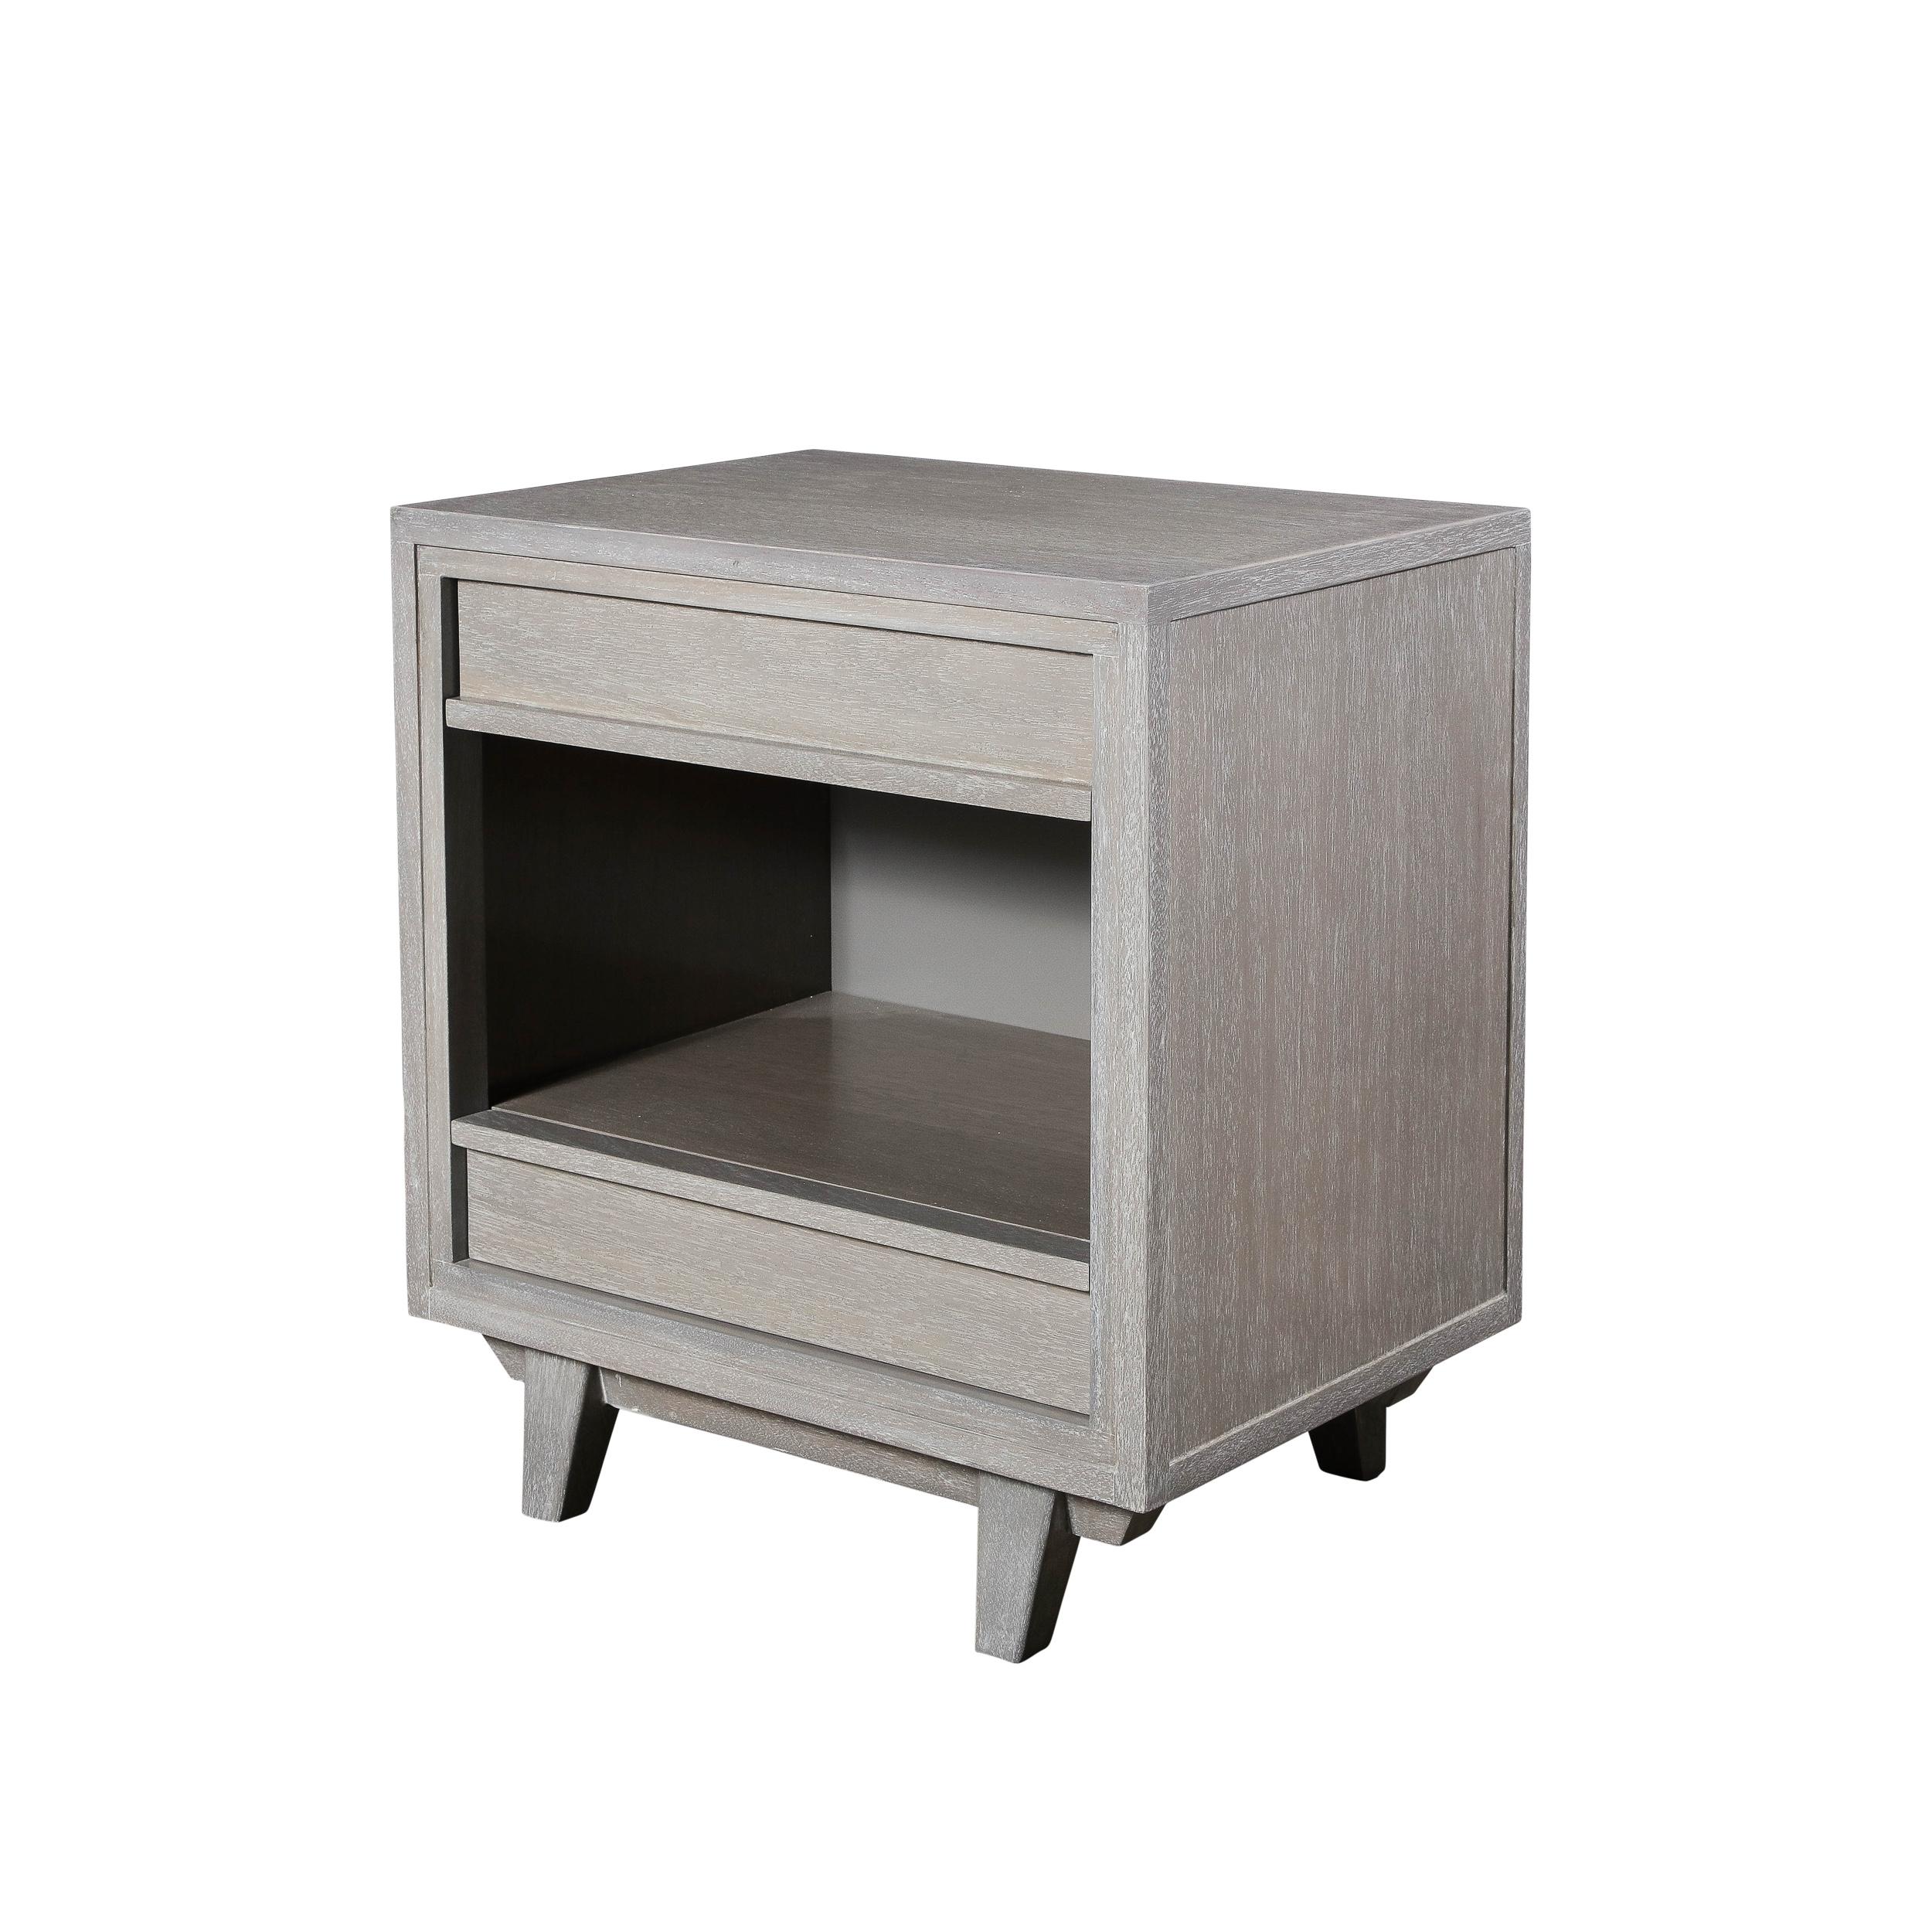 This pair of Mid-Century Modernist Rectilinear Nightstands in Silver Cerused Walnut originate from the United States circa 1960. Featuring a beautifully proportioned rectangular design with drawers located on the top and bottom thirds of the piece,